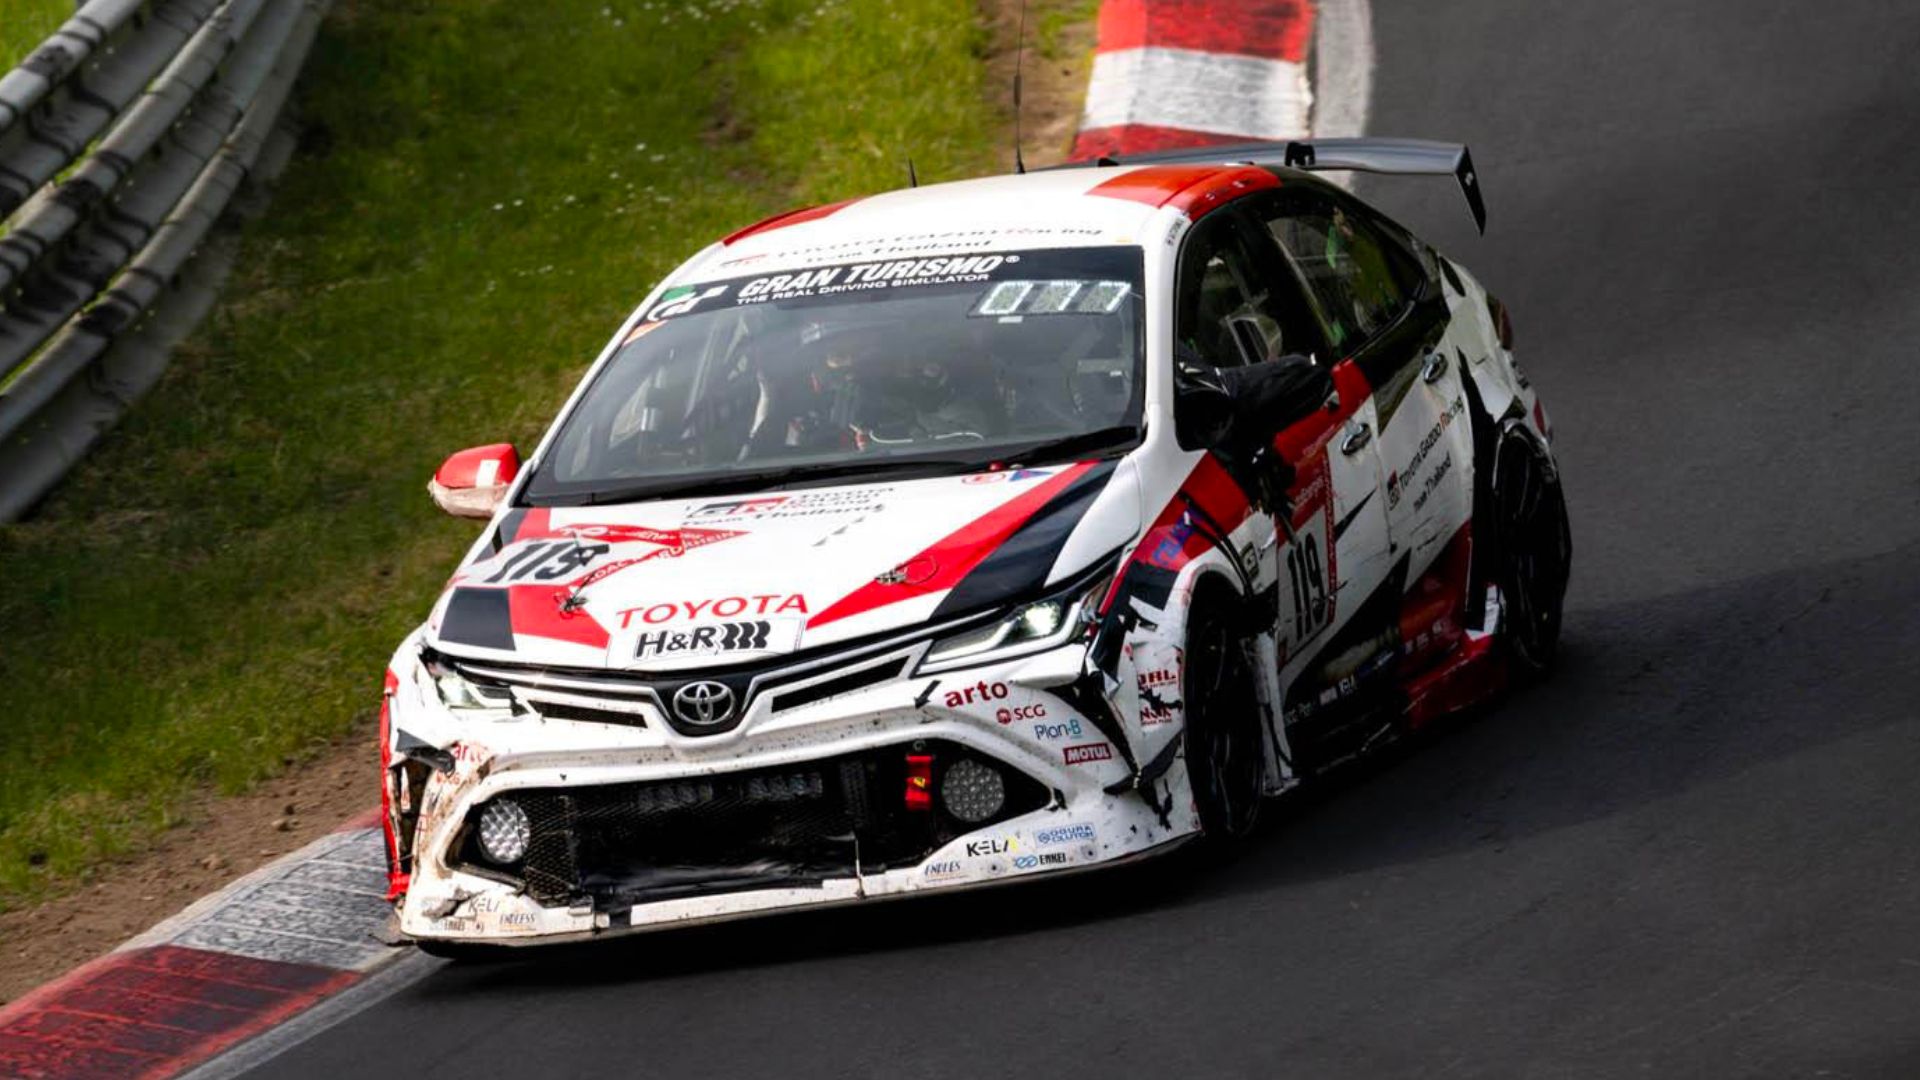 Toyota Corolla Altis takes class win in Nurburgring 24 Hours